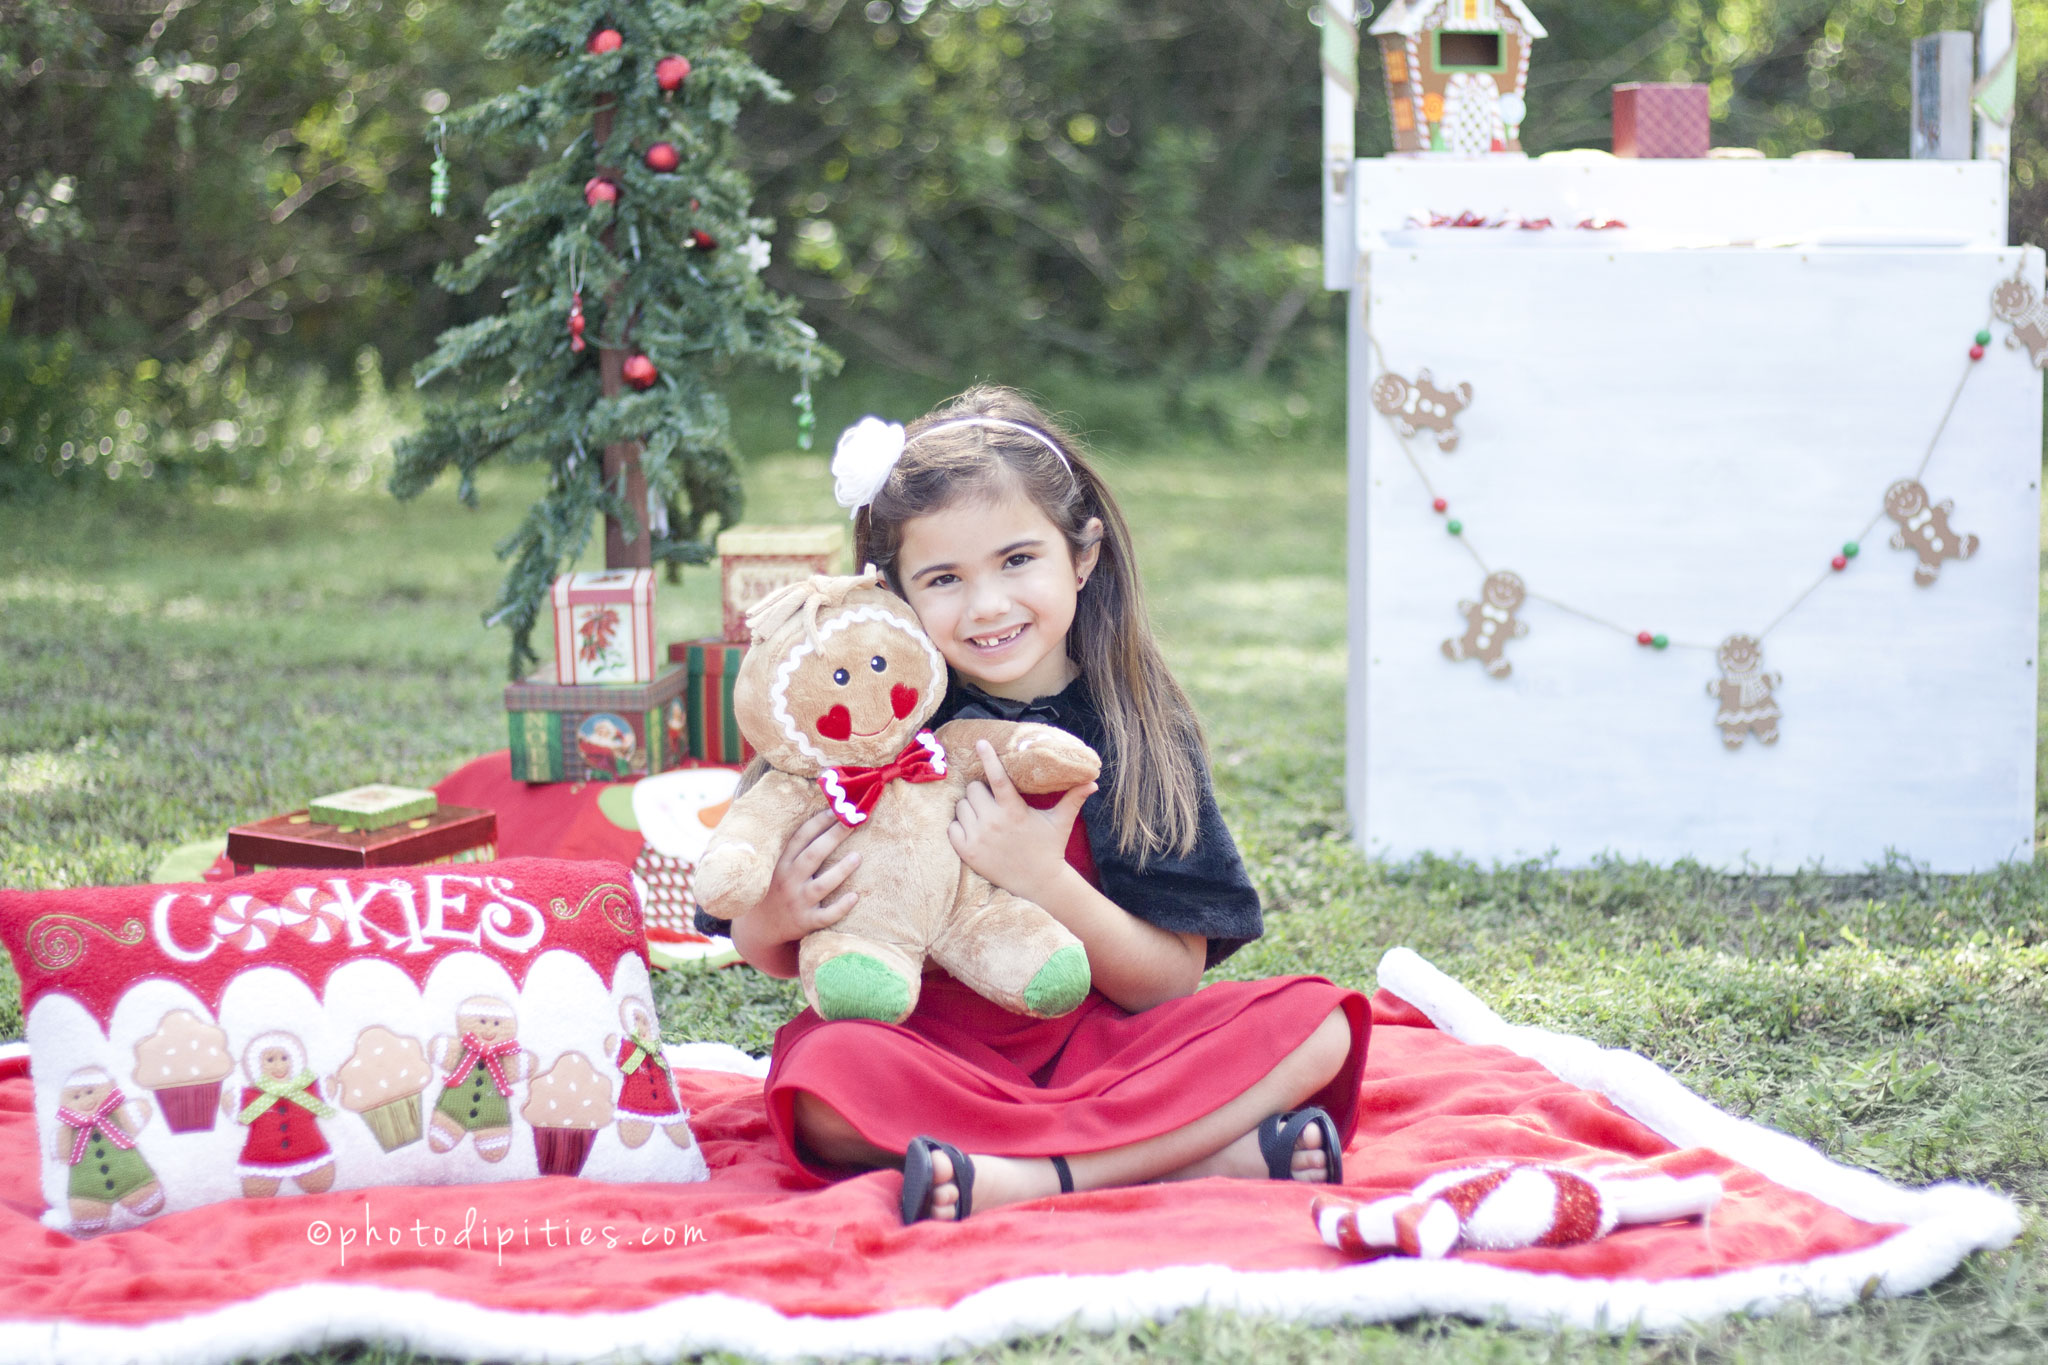 Photodipities Family | Children Photography - Christmas Mini Sessions